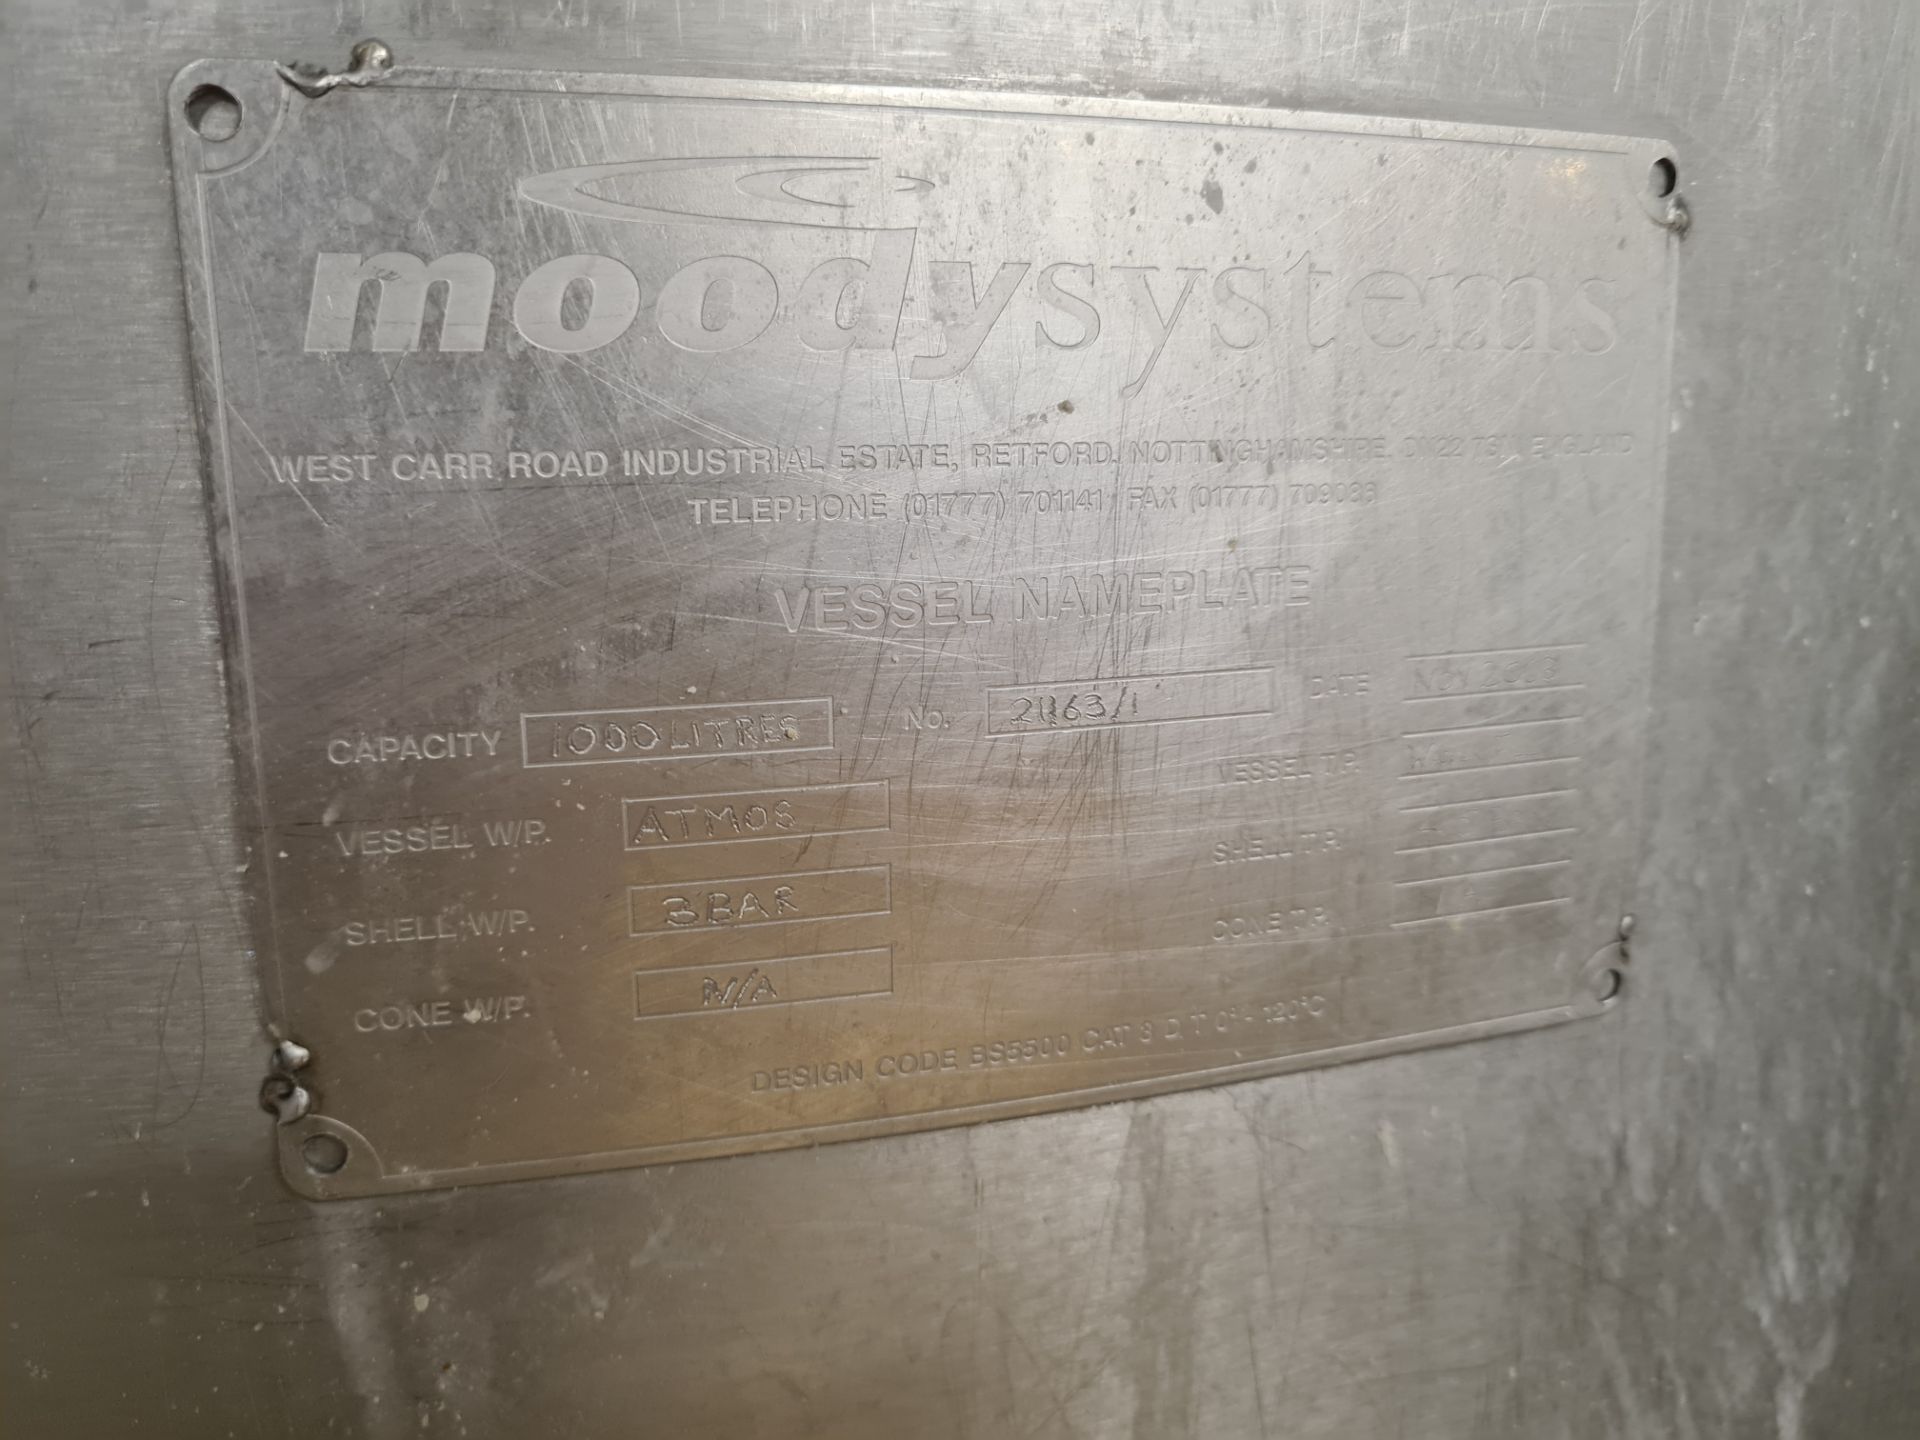 Moody Systems 1000 litres STAINLESS STEEL JACKETED HOT WATER TANK, serial no. 21163/1, year of - Image 4 of 4